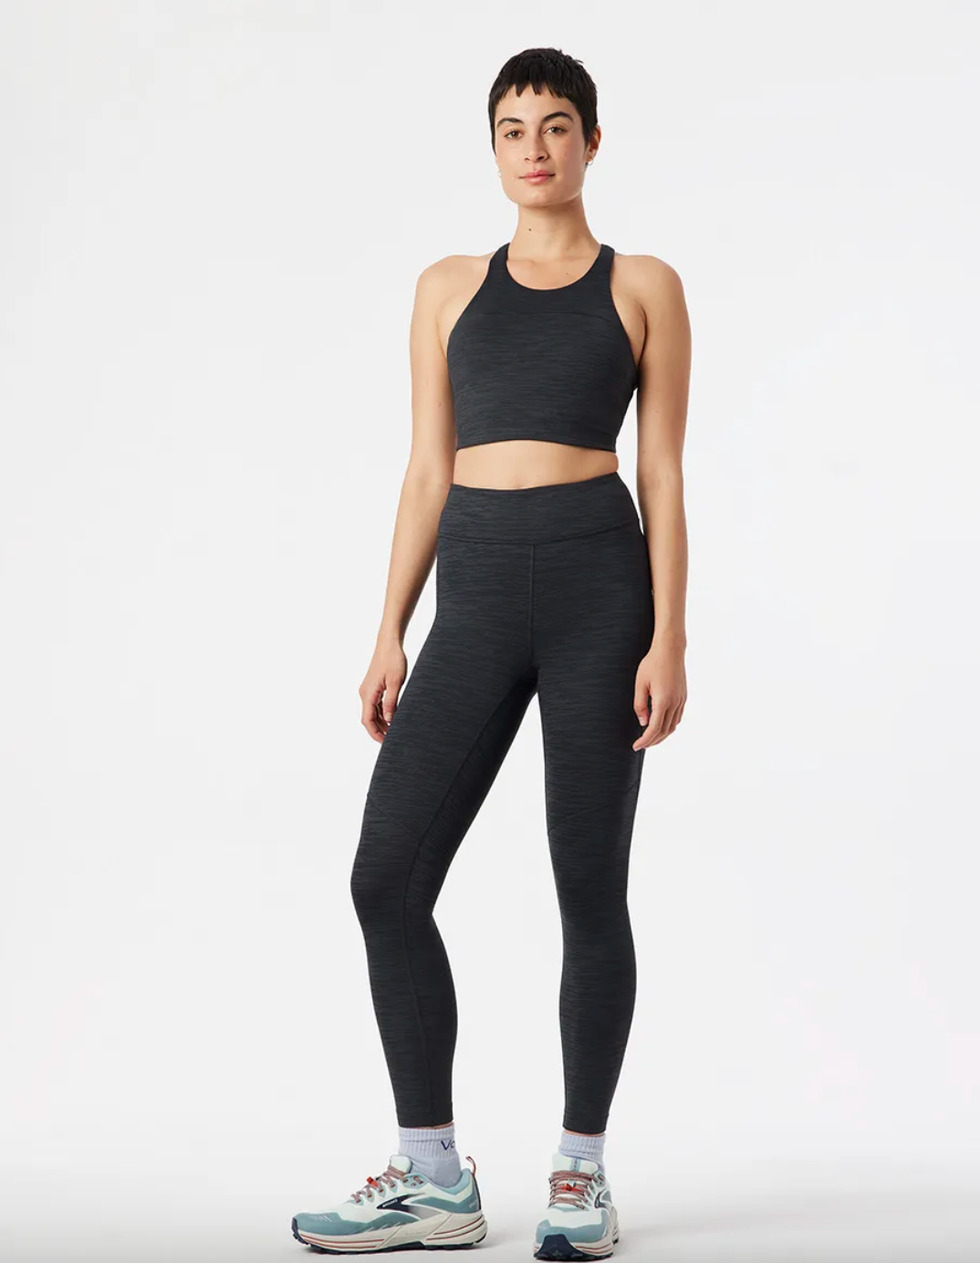 Outdoor Voices' Sleek Activewear Is Popping Up at The Grove Next Week